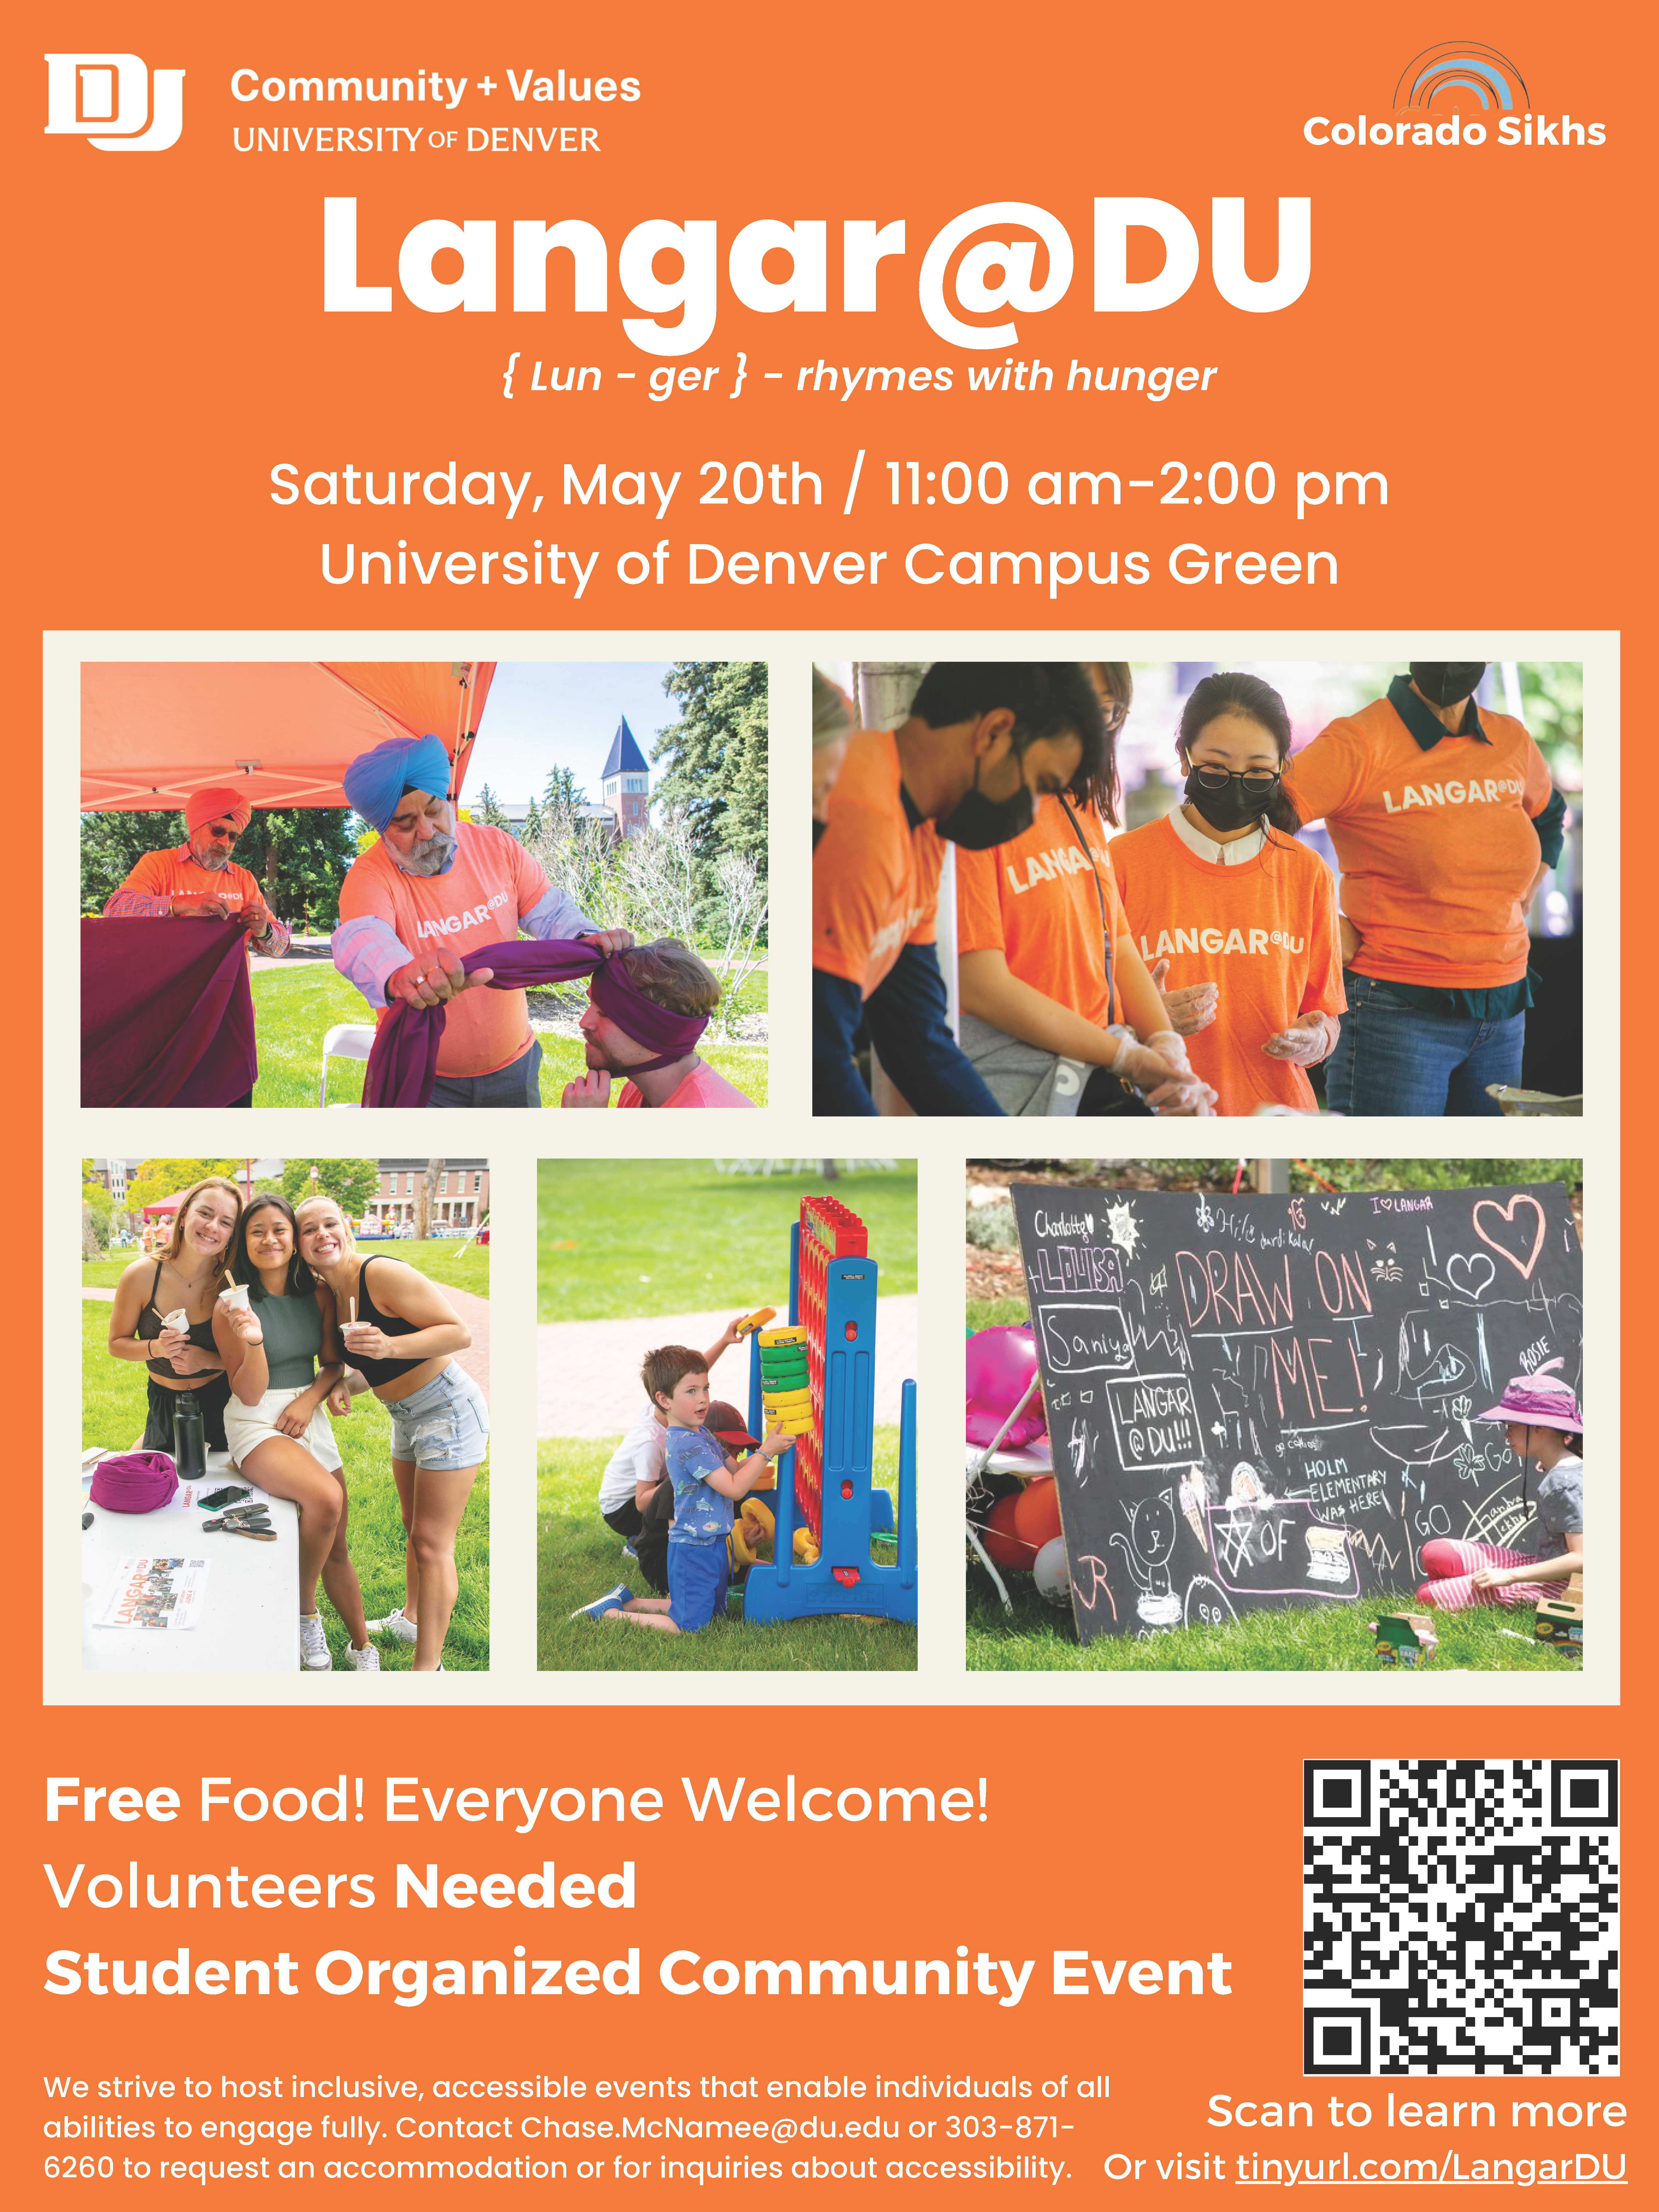 Langar@DU flyer - orange background with the text from the above paragraphs